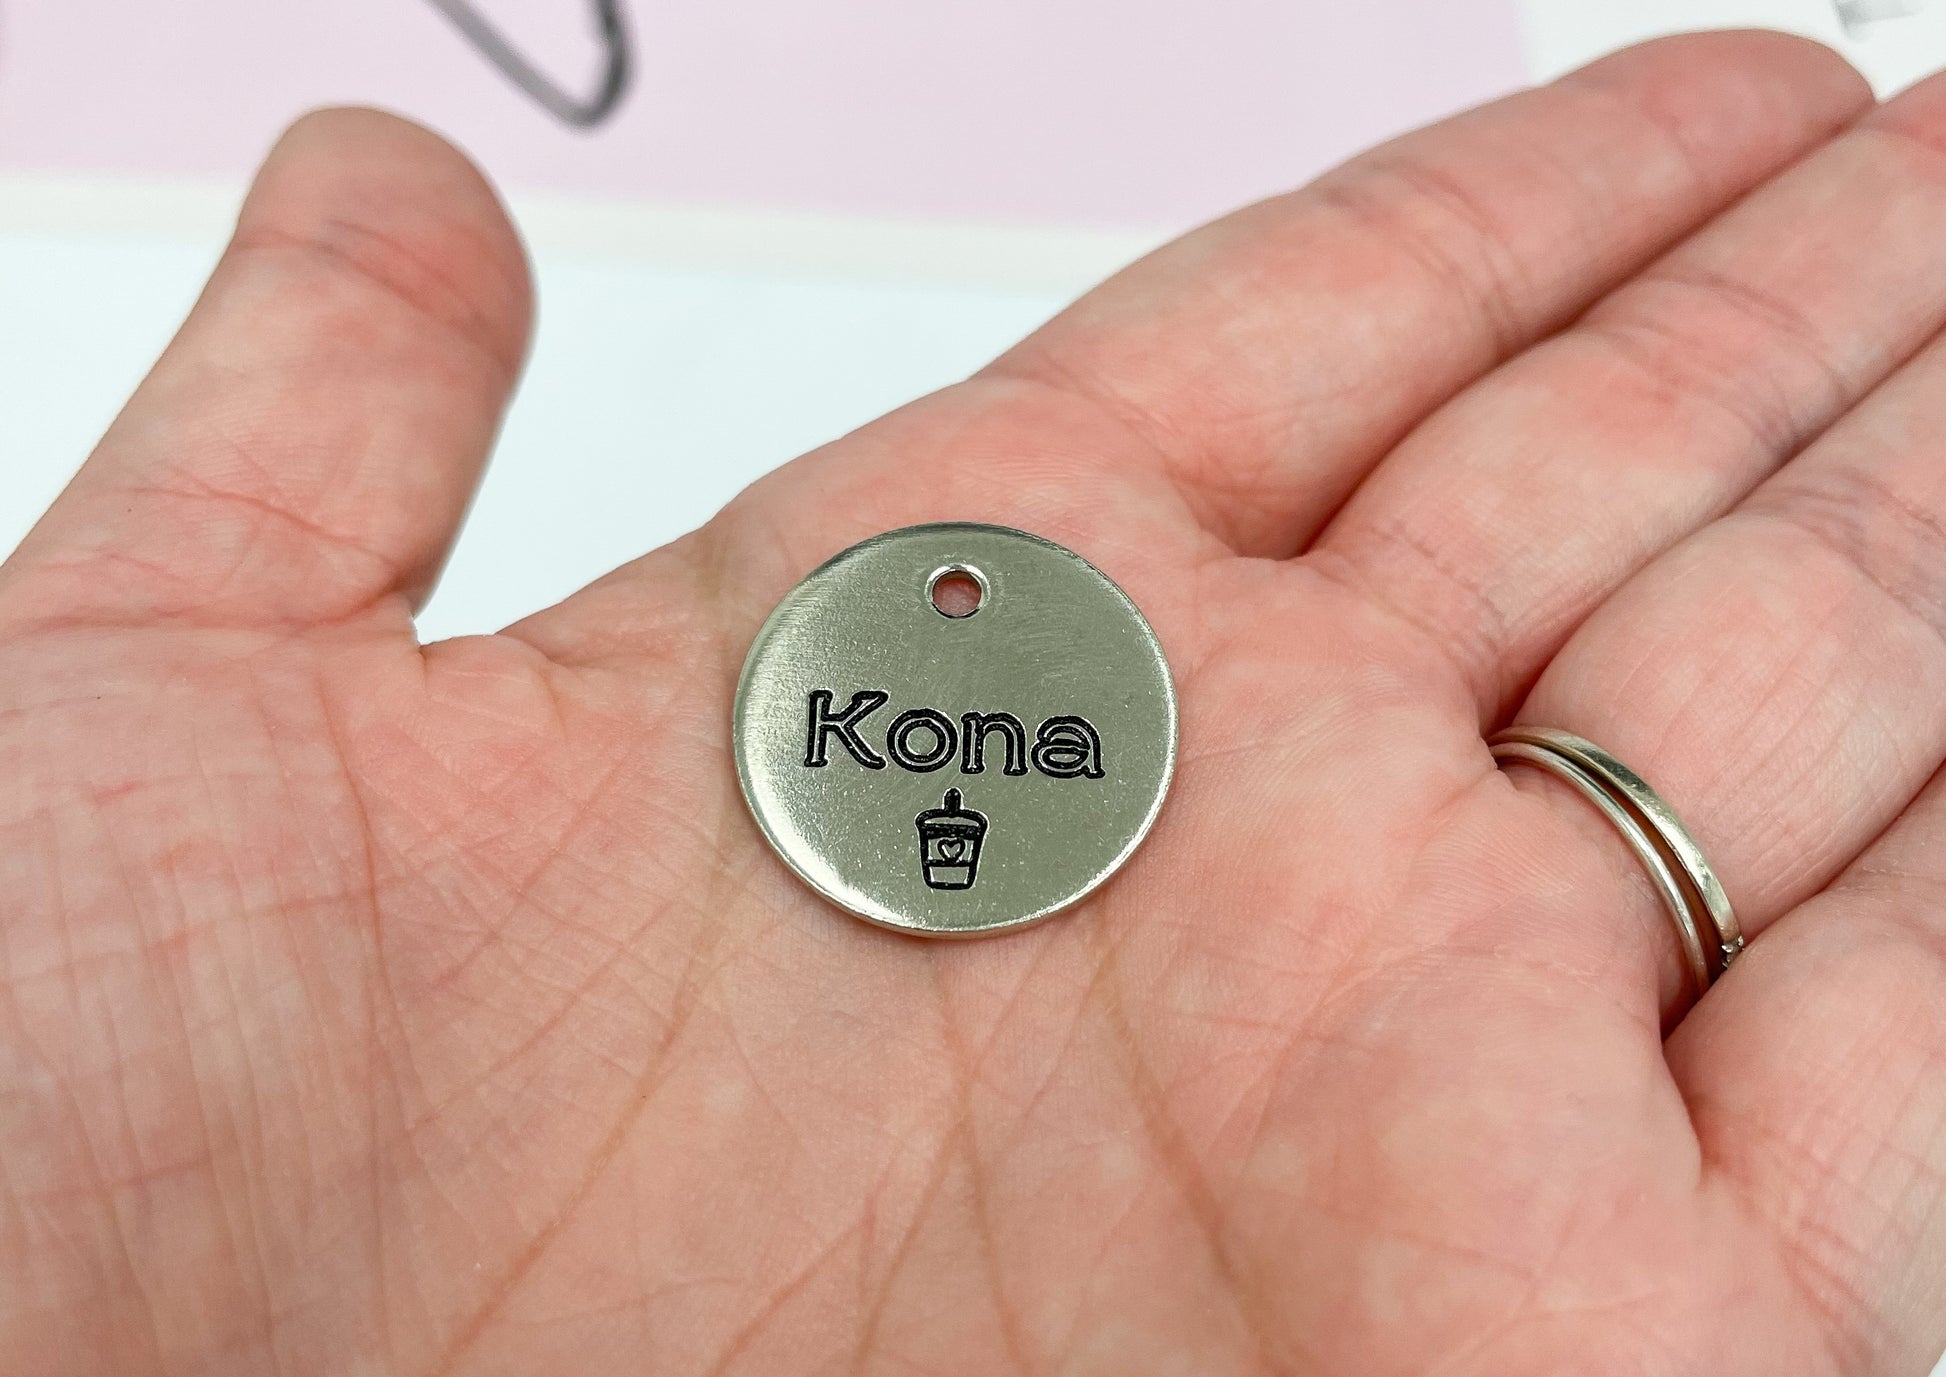 Personalized Dog Tag - Coffee Cup Design Engraved Dog Tag - Cat ID Tag - Dog Collar Tag - Custom Dog Tag - Personalized Tag - Pet ID Tag - Pet Name Tag - Kona - Iced Coffee - Iced Coffee Dog Tag - Dog Gear - Dog Accessories - Pet Accessories - Coffee Lover Gift -